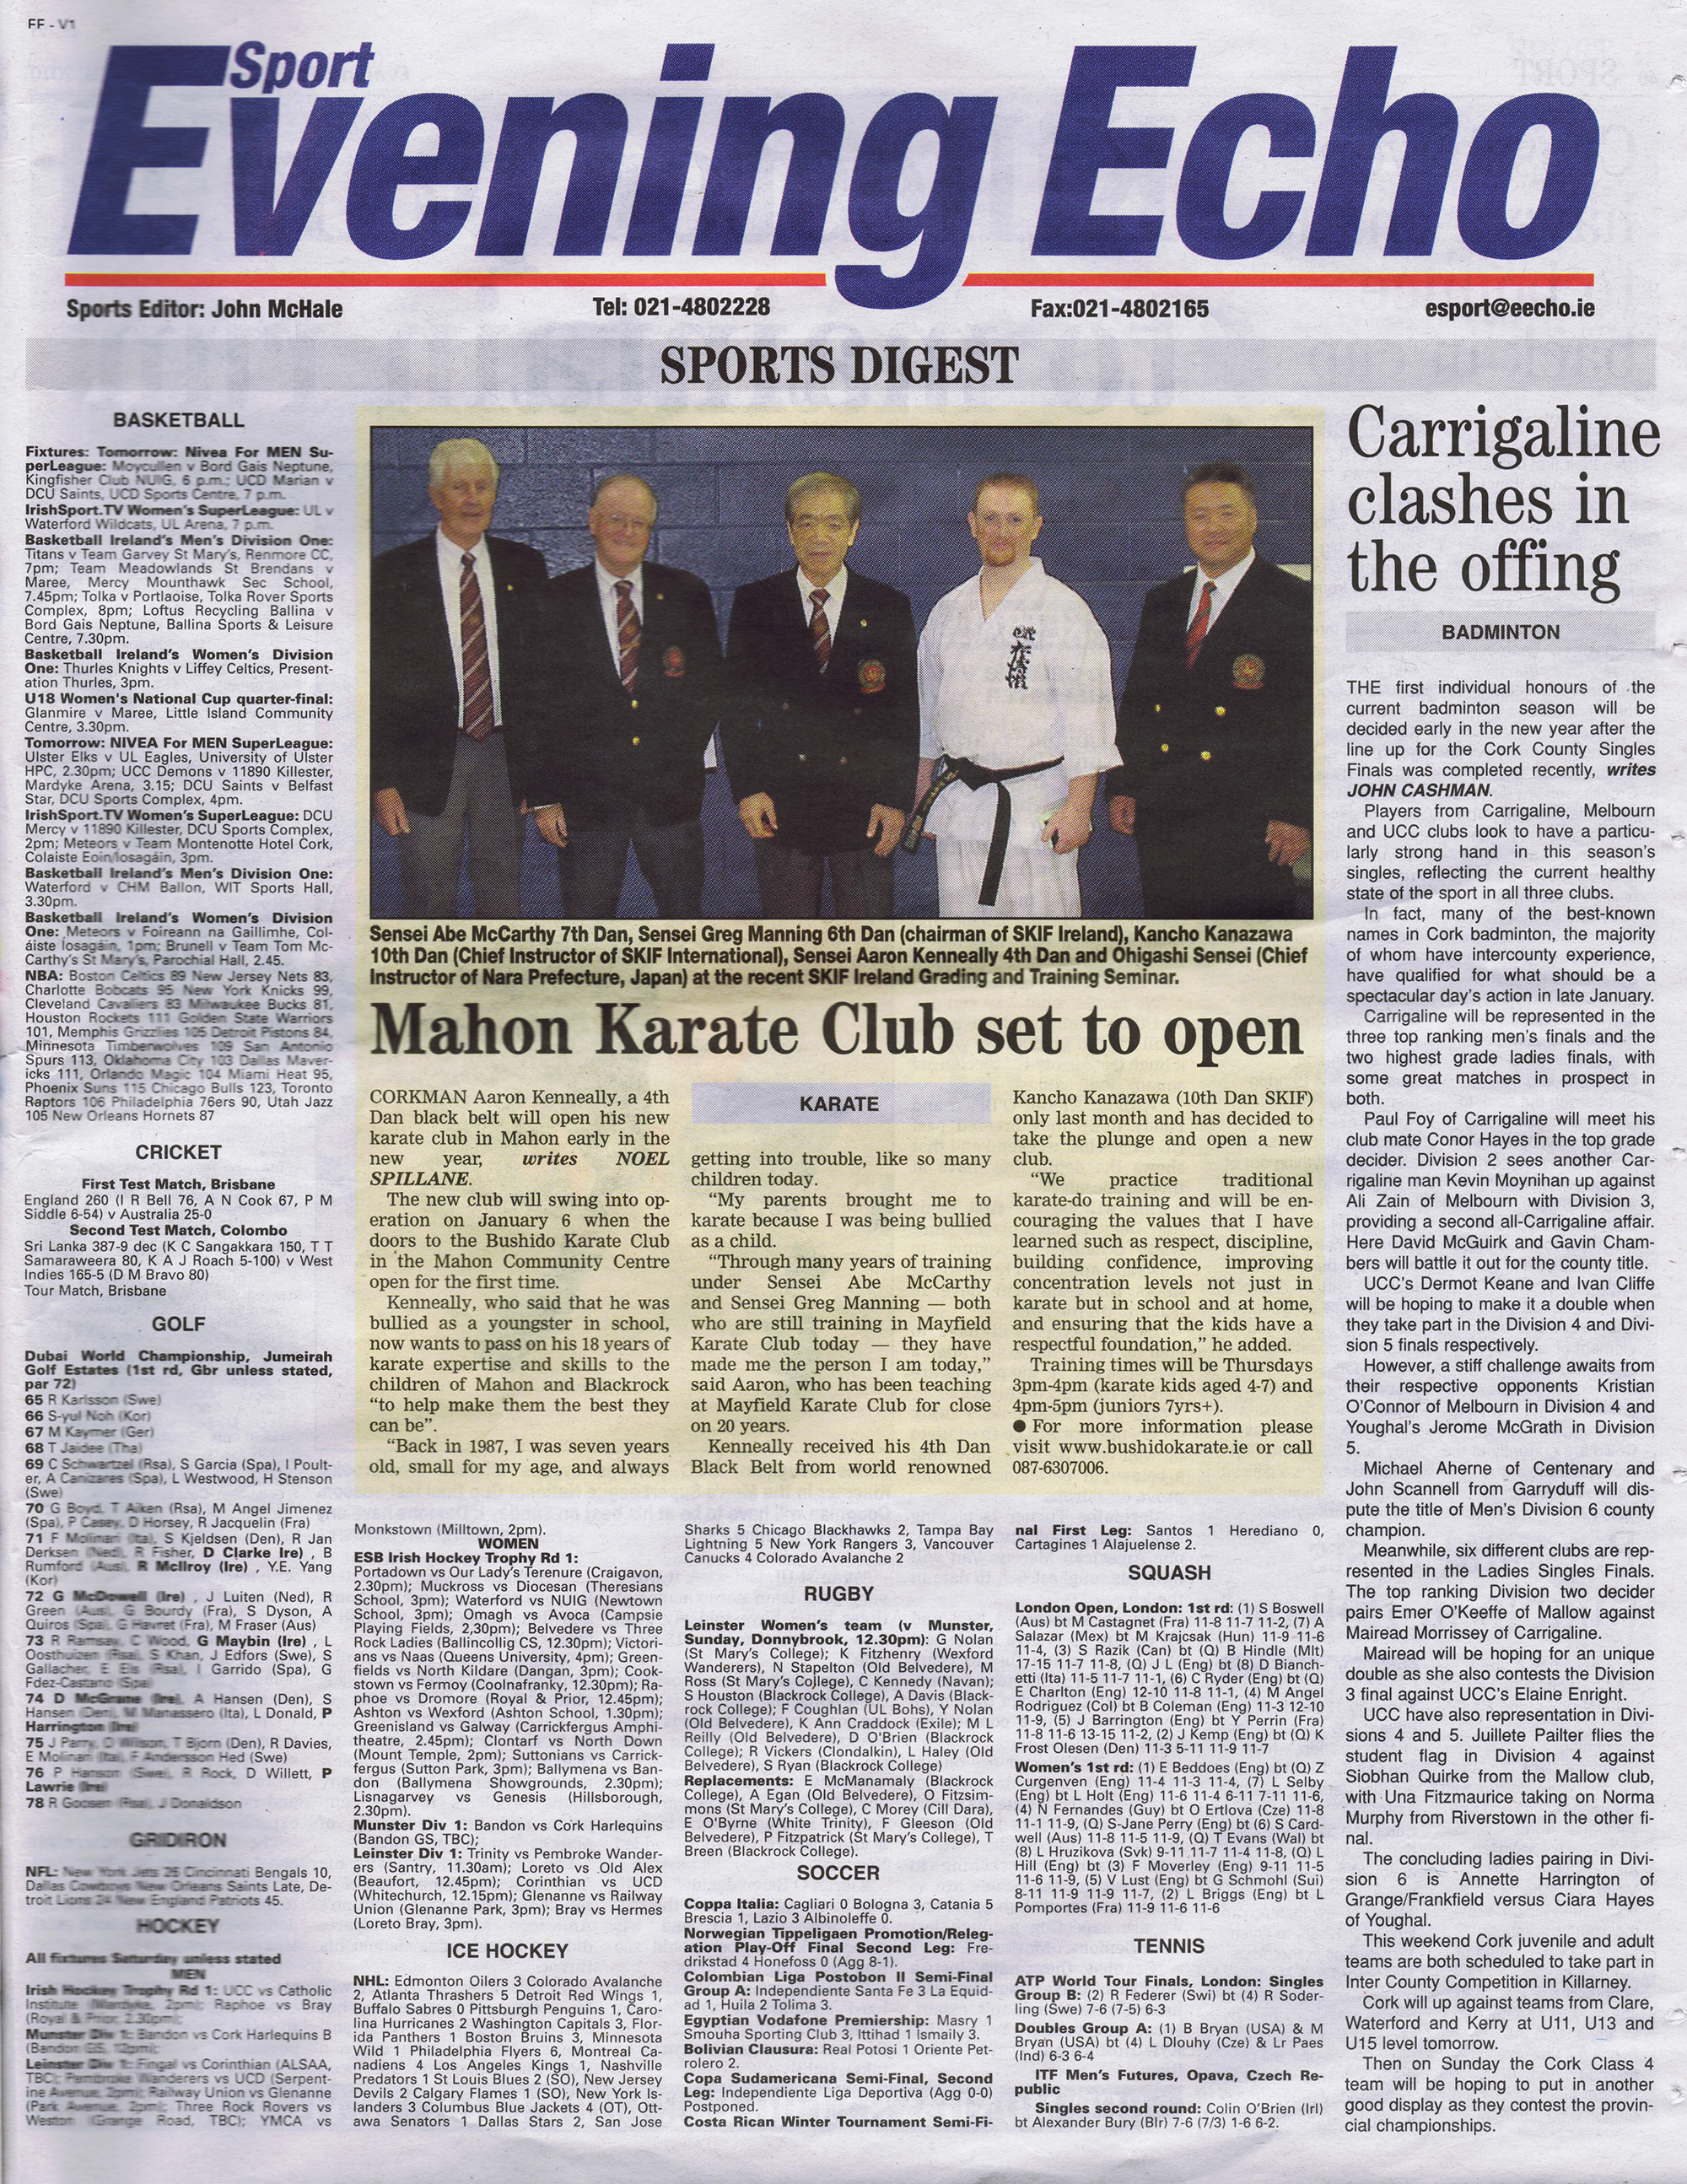 Evening Echo Feature - Mahon Karate Club set to open